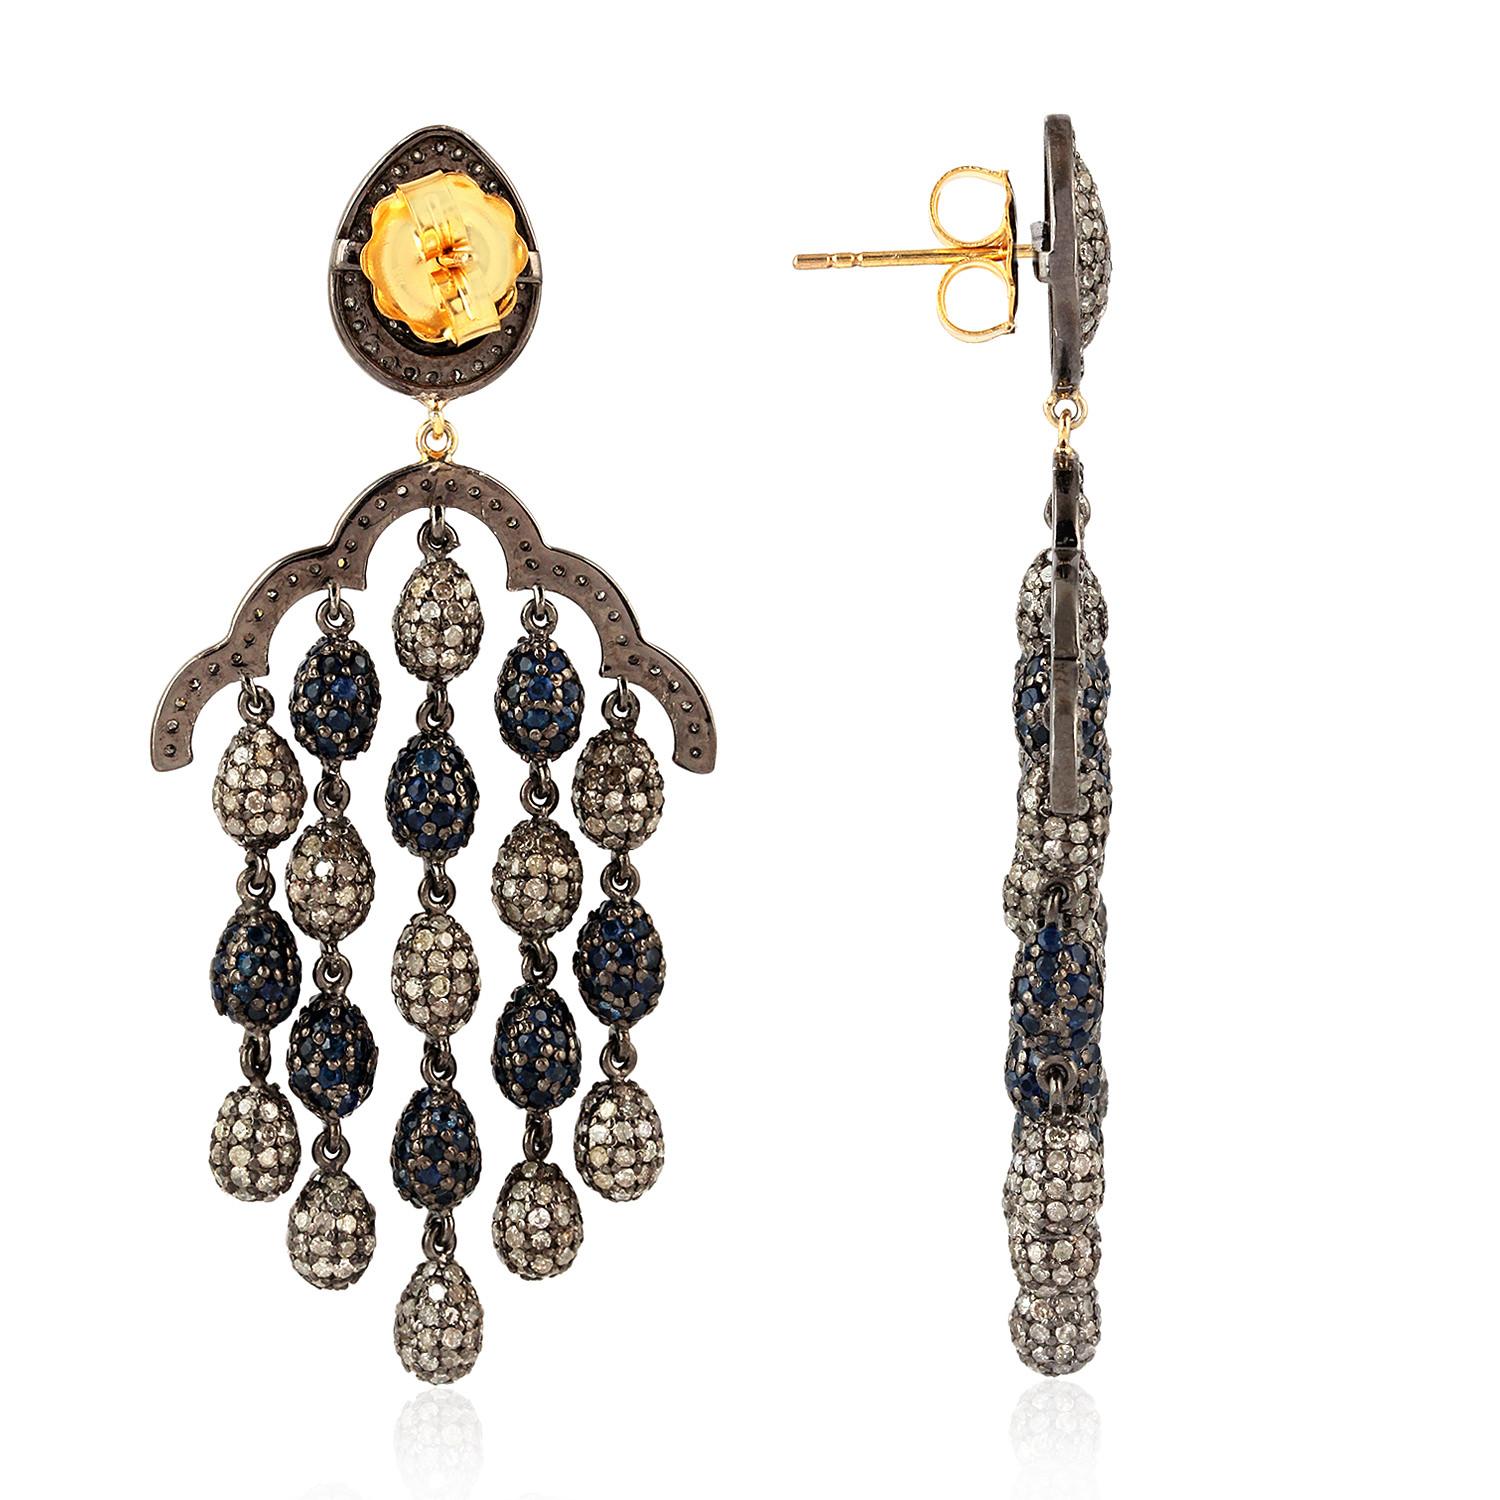 Contemporary Pave Sapphire & Pave Diamond Drops Chandelier Earrings Made In 14k Gold & Silver For Sale